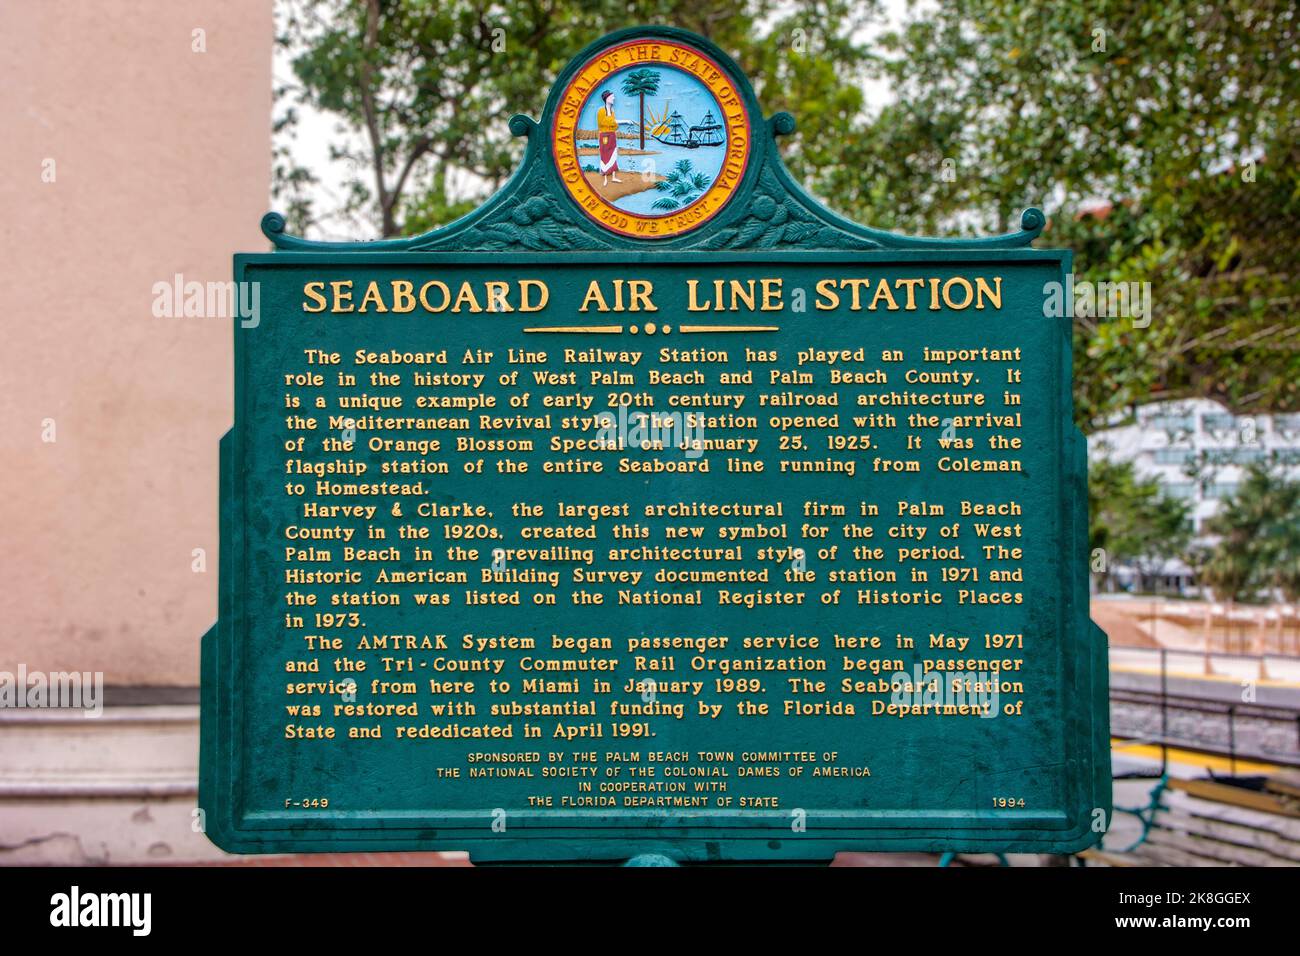 Historic marker for the Seaboard Air Line Station, now used by Amtrak trains in West Palm Beach, Florida. Stock Photo